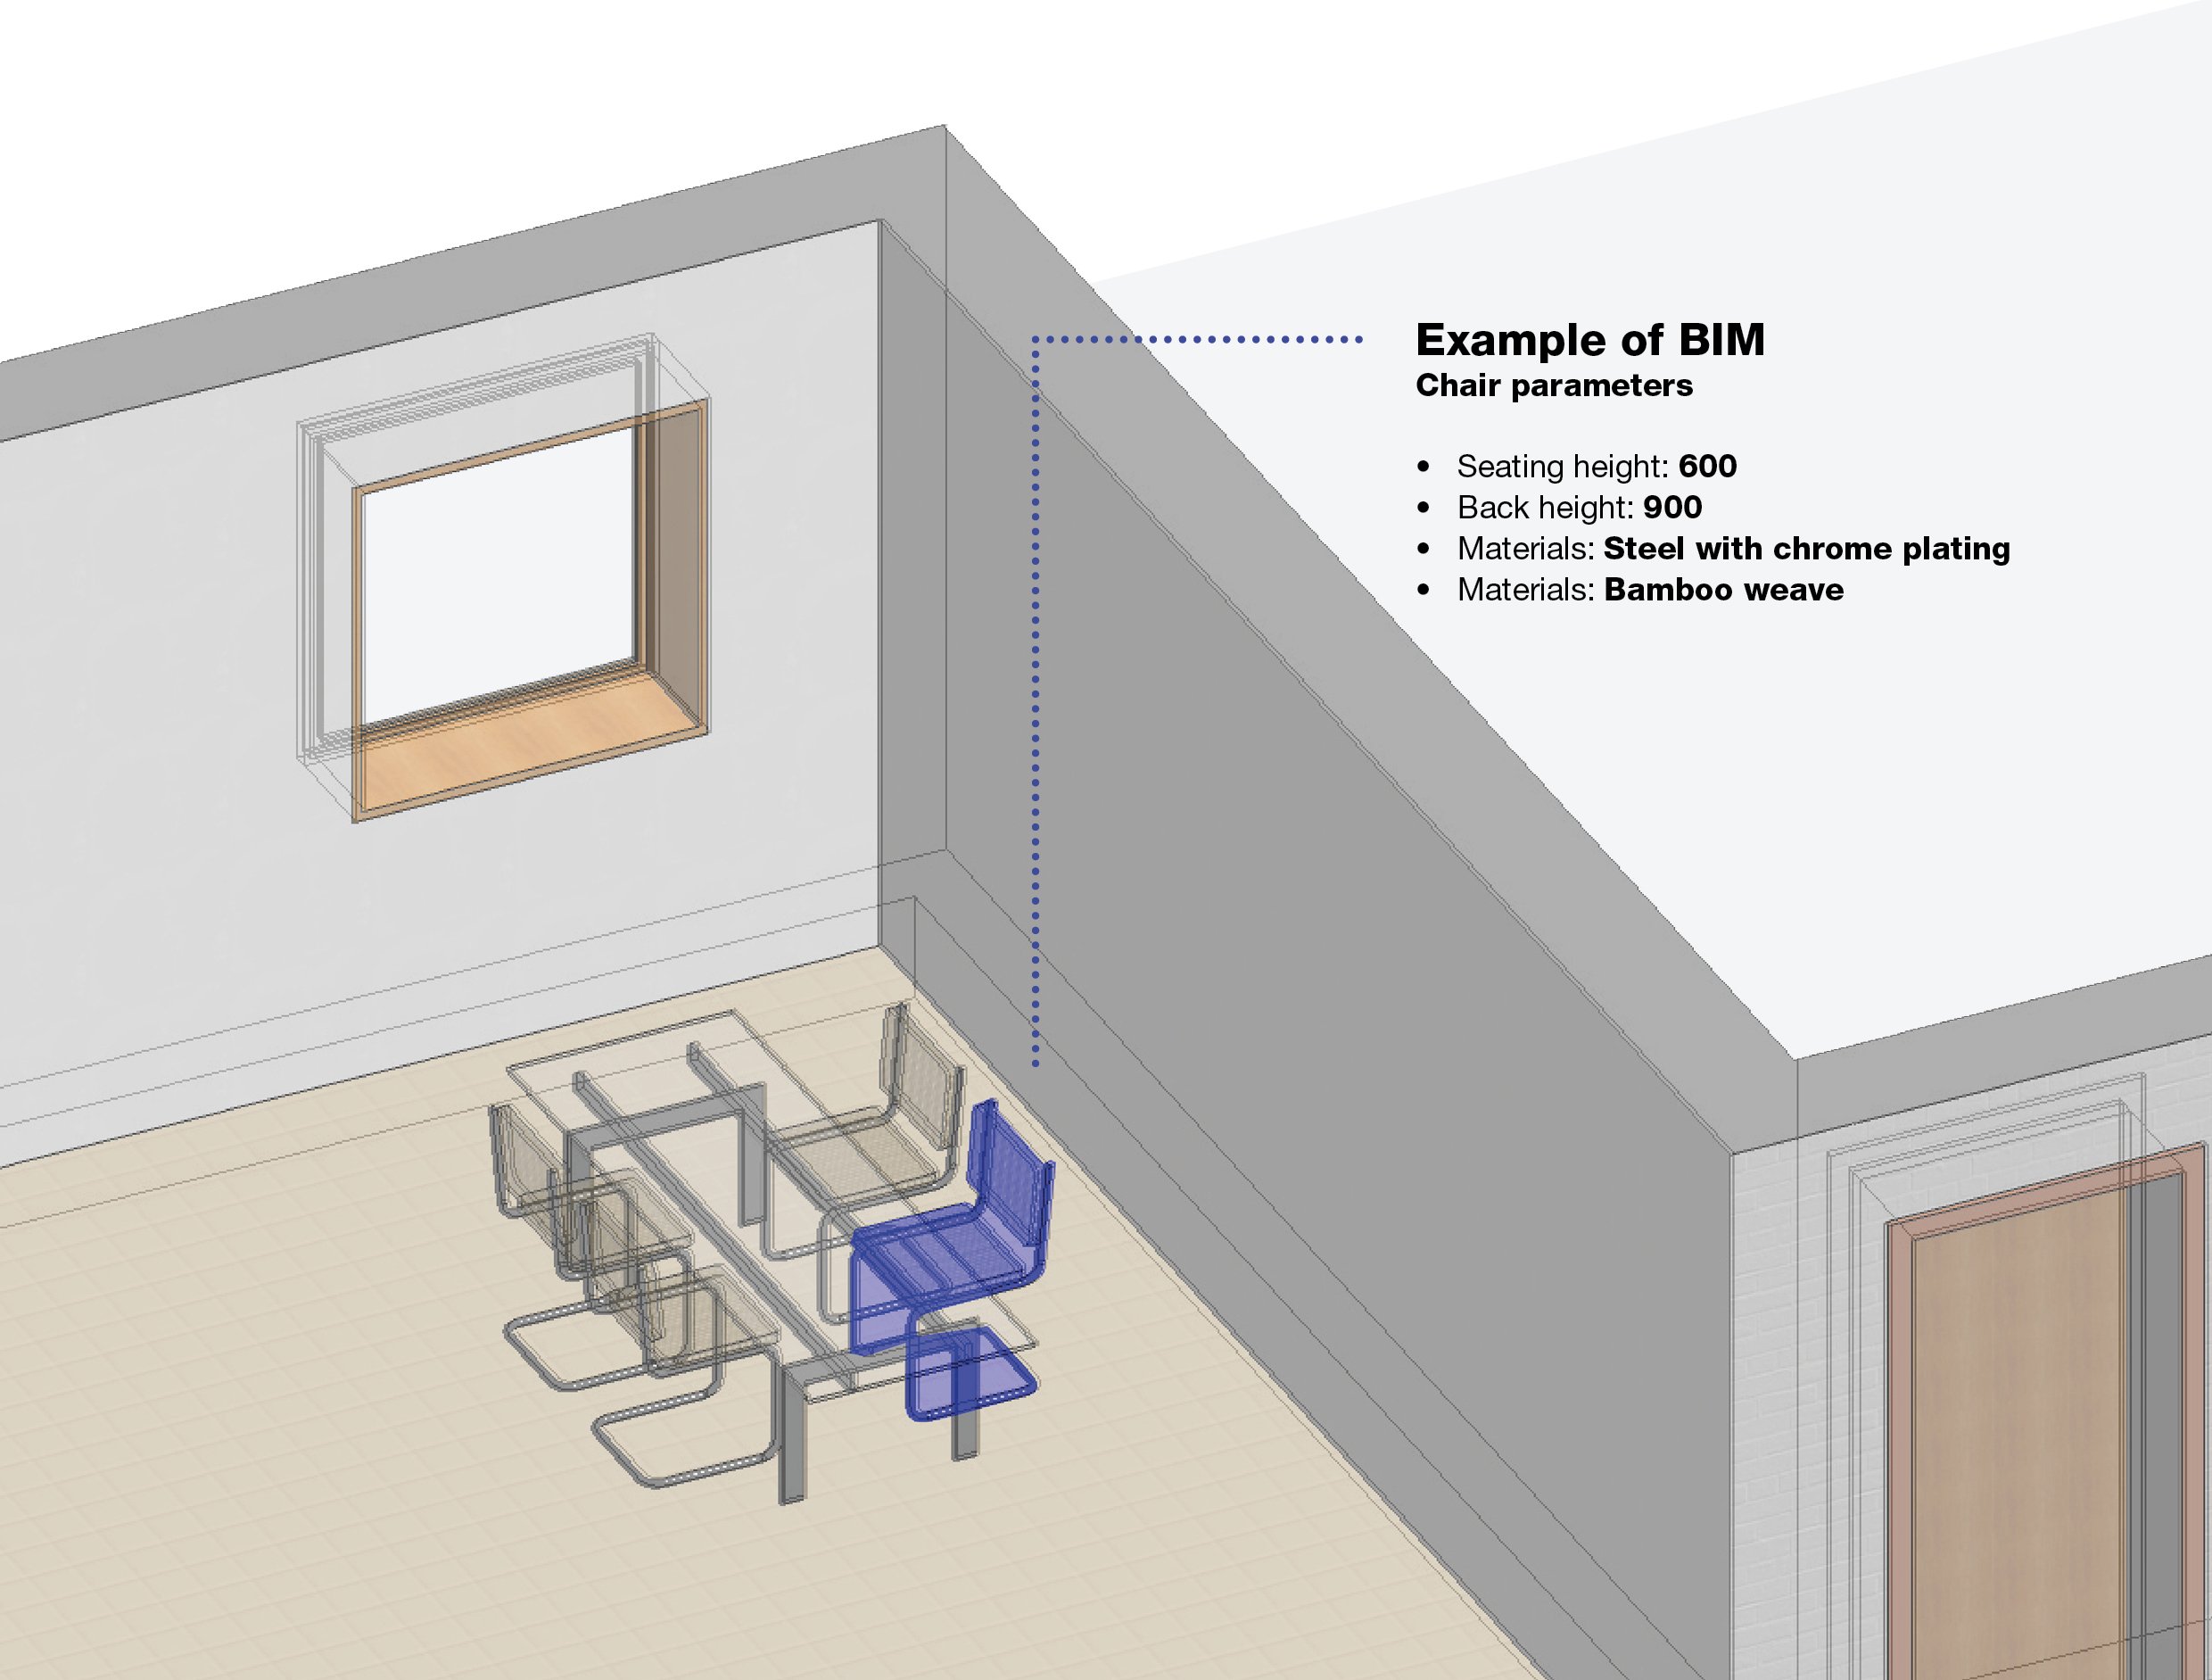 Benefits of using BIM objects as a furniture manufacturer - Cadesign form